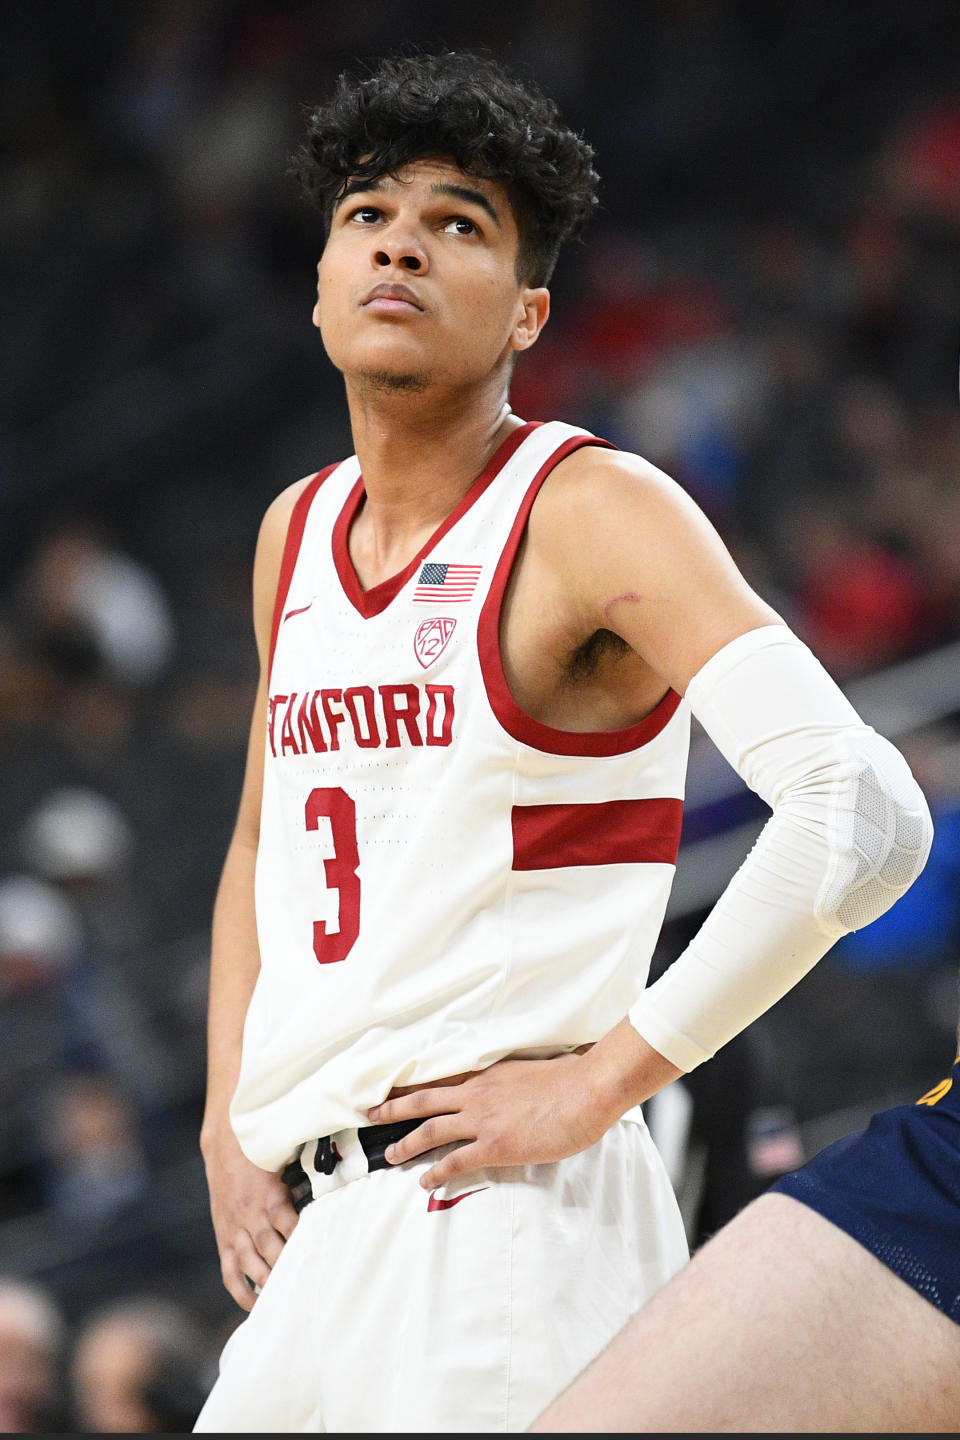 LAS VEGAS, NV – MARCH 11: Stanford Cardinal guard Tyrell Terry (3) looks on during the first round game of the men’s Pac-12 Tournament between the Stanford Cardinal and the California Bears on March 11, 2020, at the T-Mobile Arena in Las Vegas, NV. Photo by Brian Rothmuller/Icon Sportswire via Getty Images